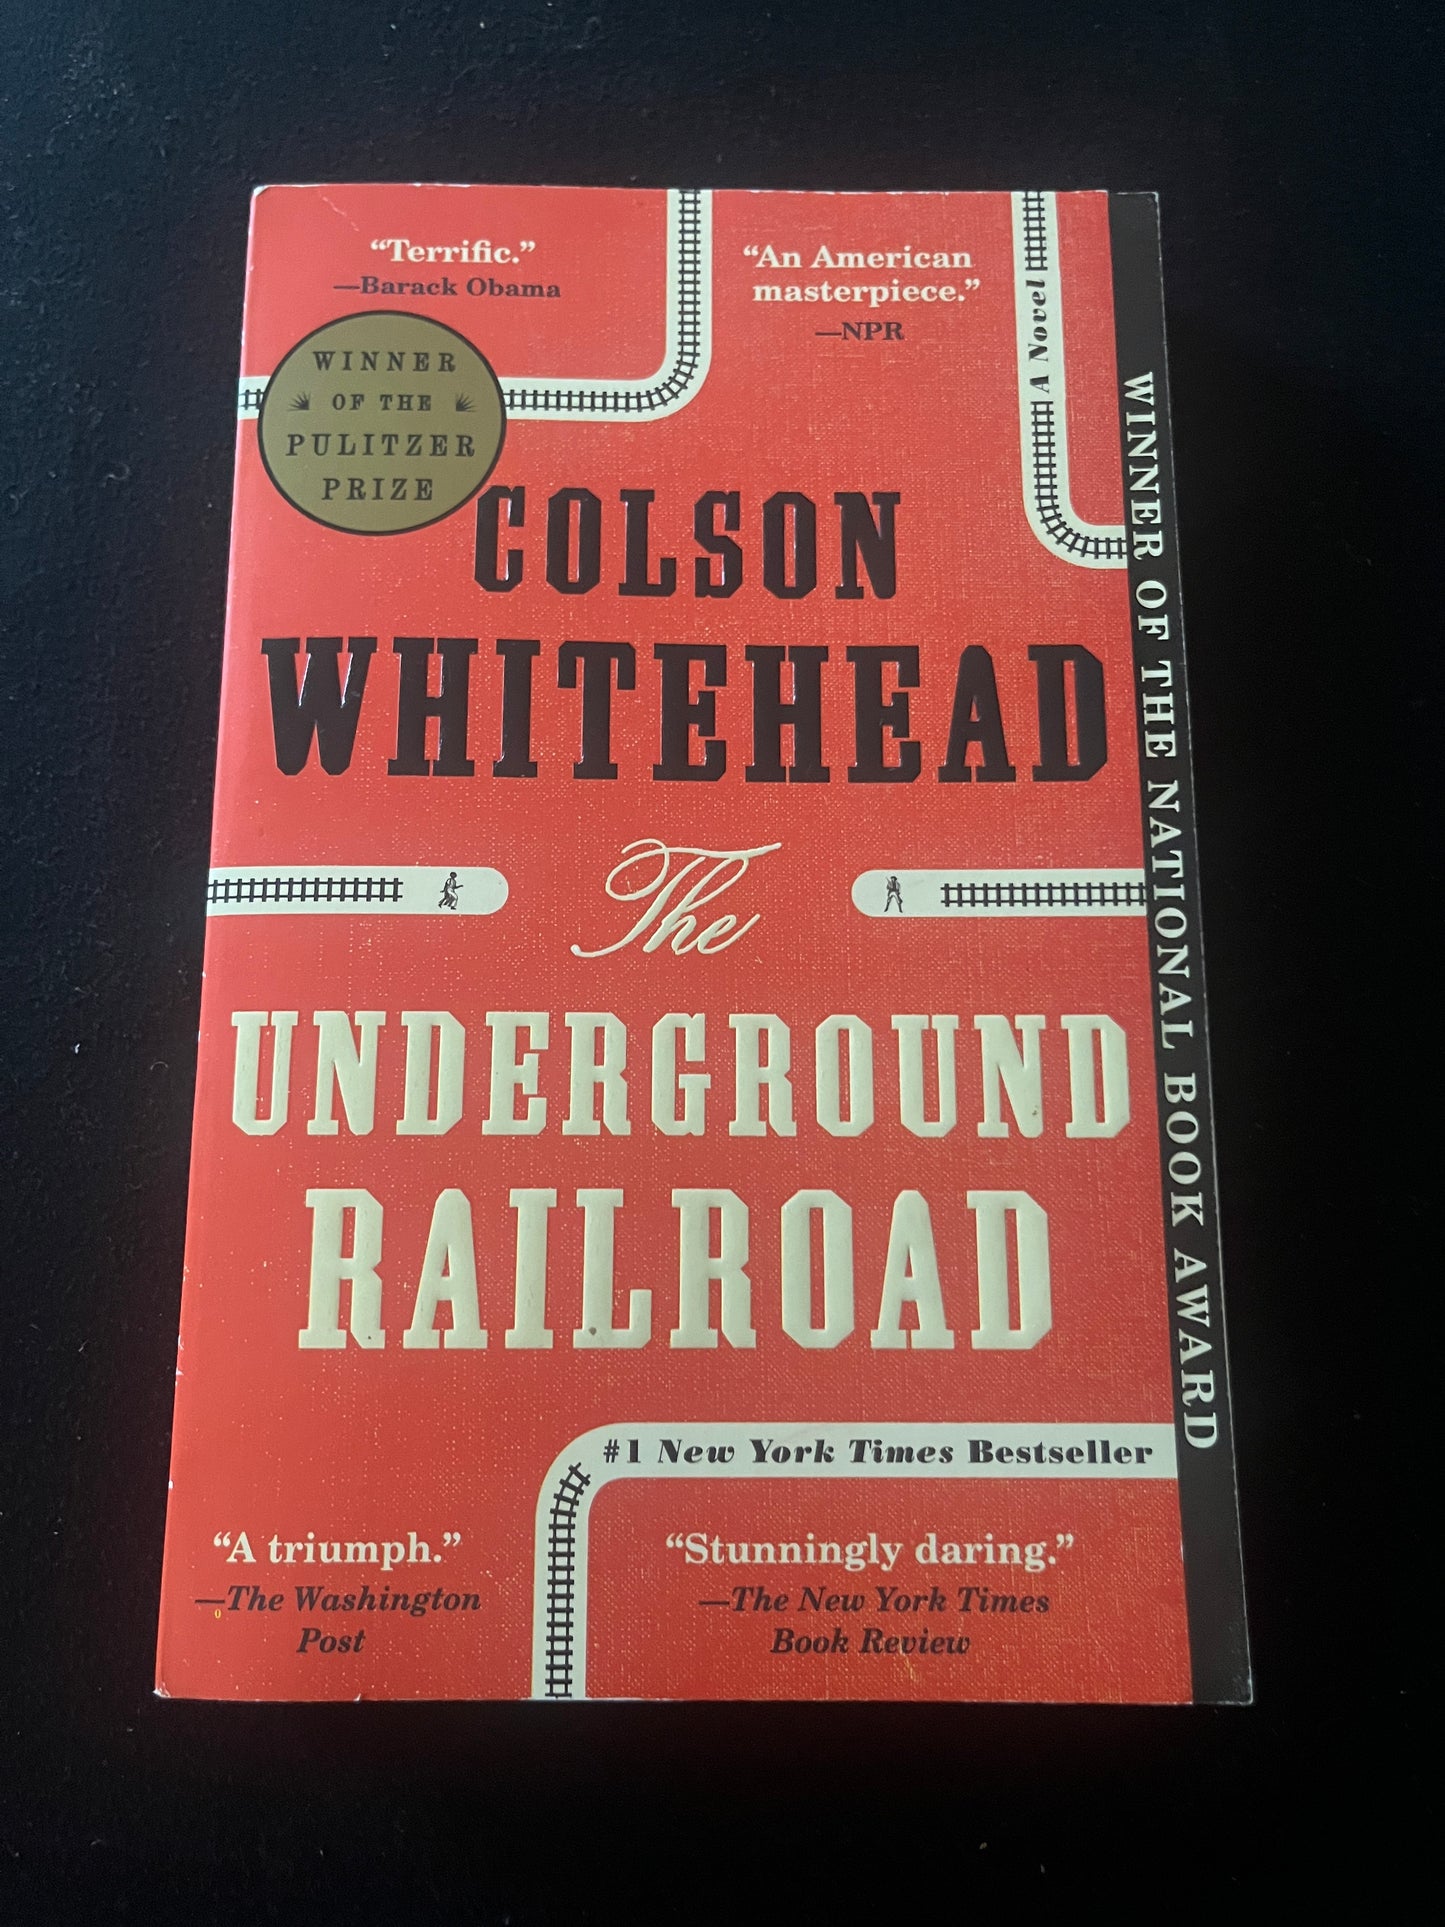 THE UNDERGROUND RAILROAD by Colson Whitehead